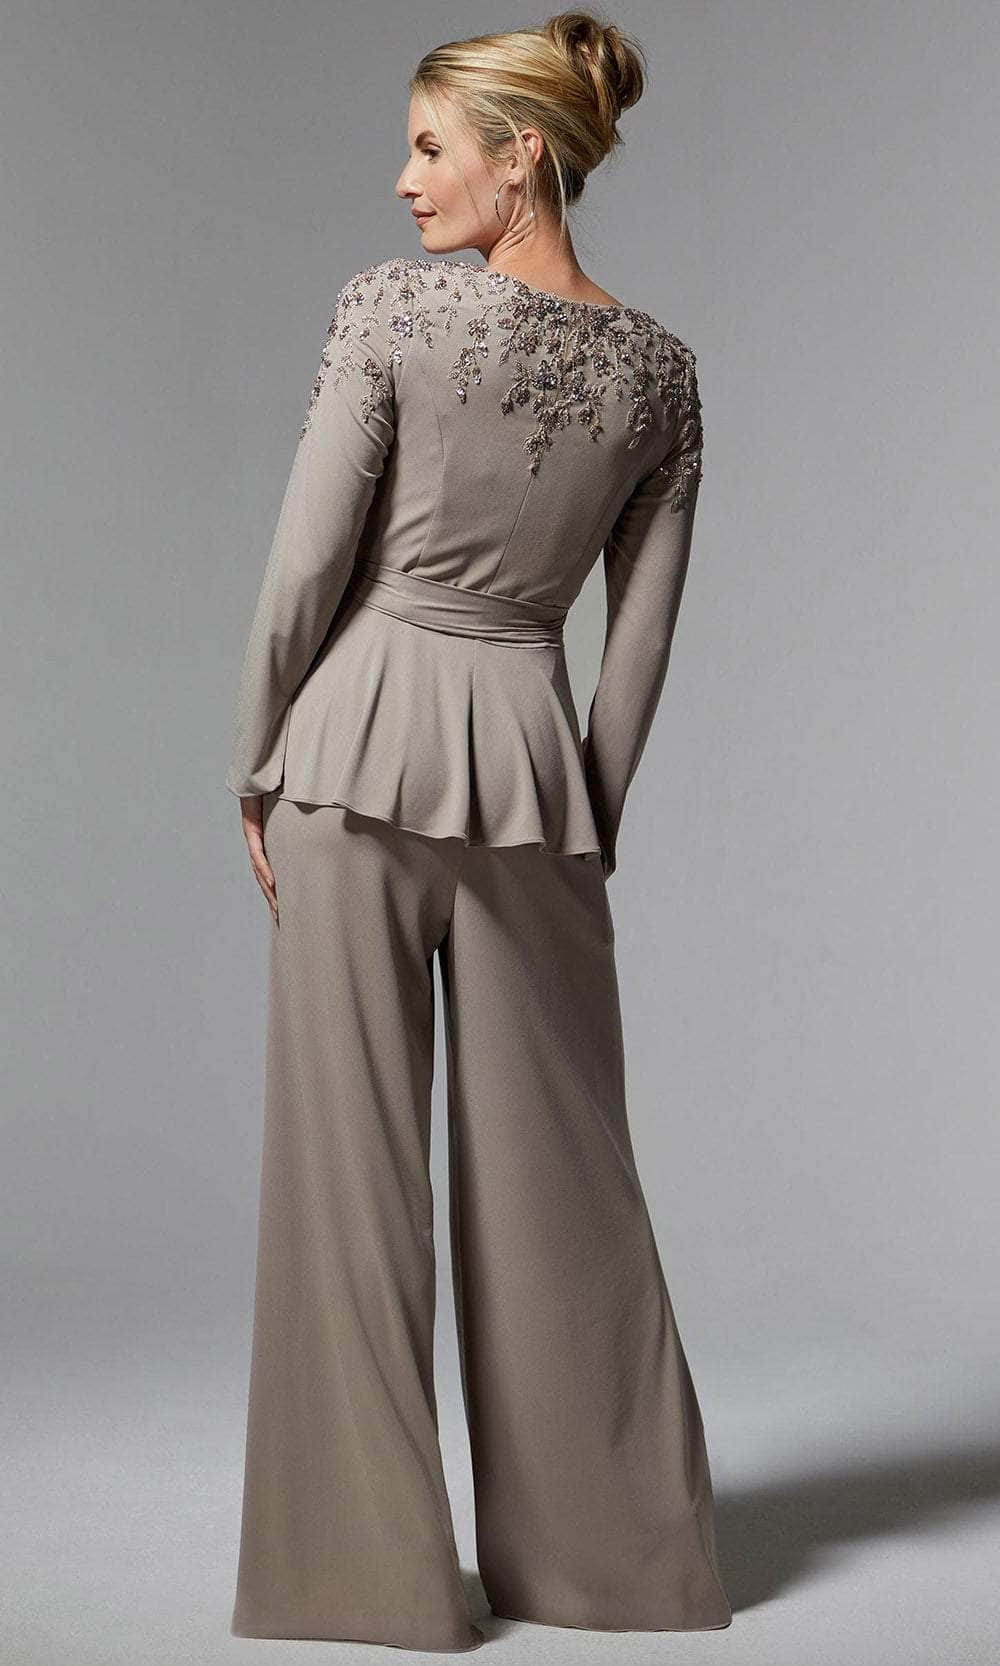 MGNY by Mori Lee 72911 - Long Sleeve Embroidered Pantsuit Formal Pantsuits